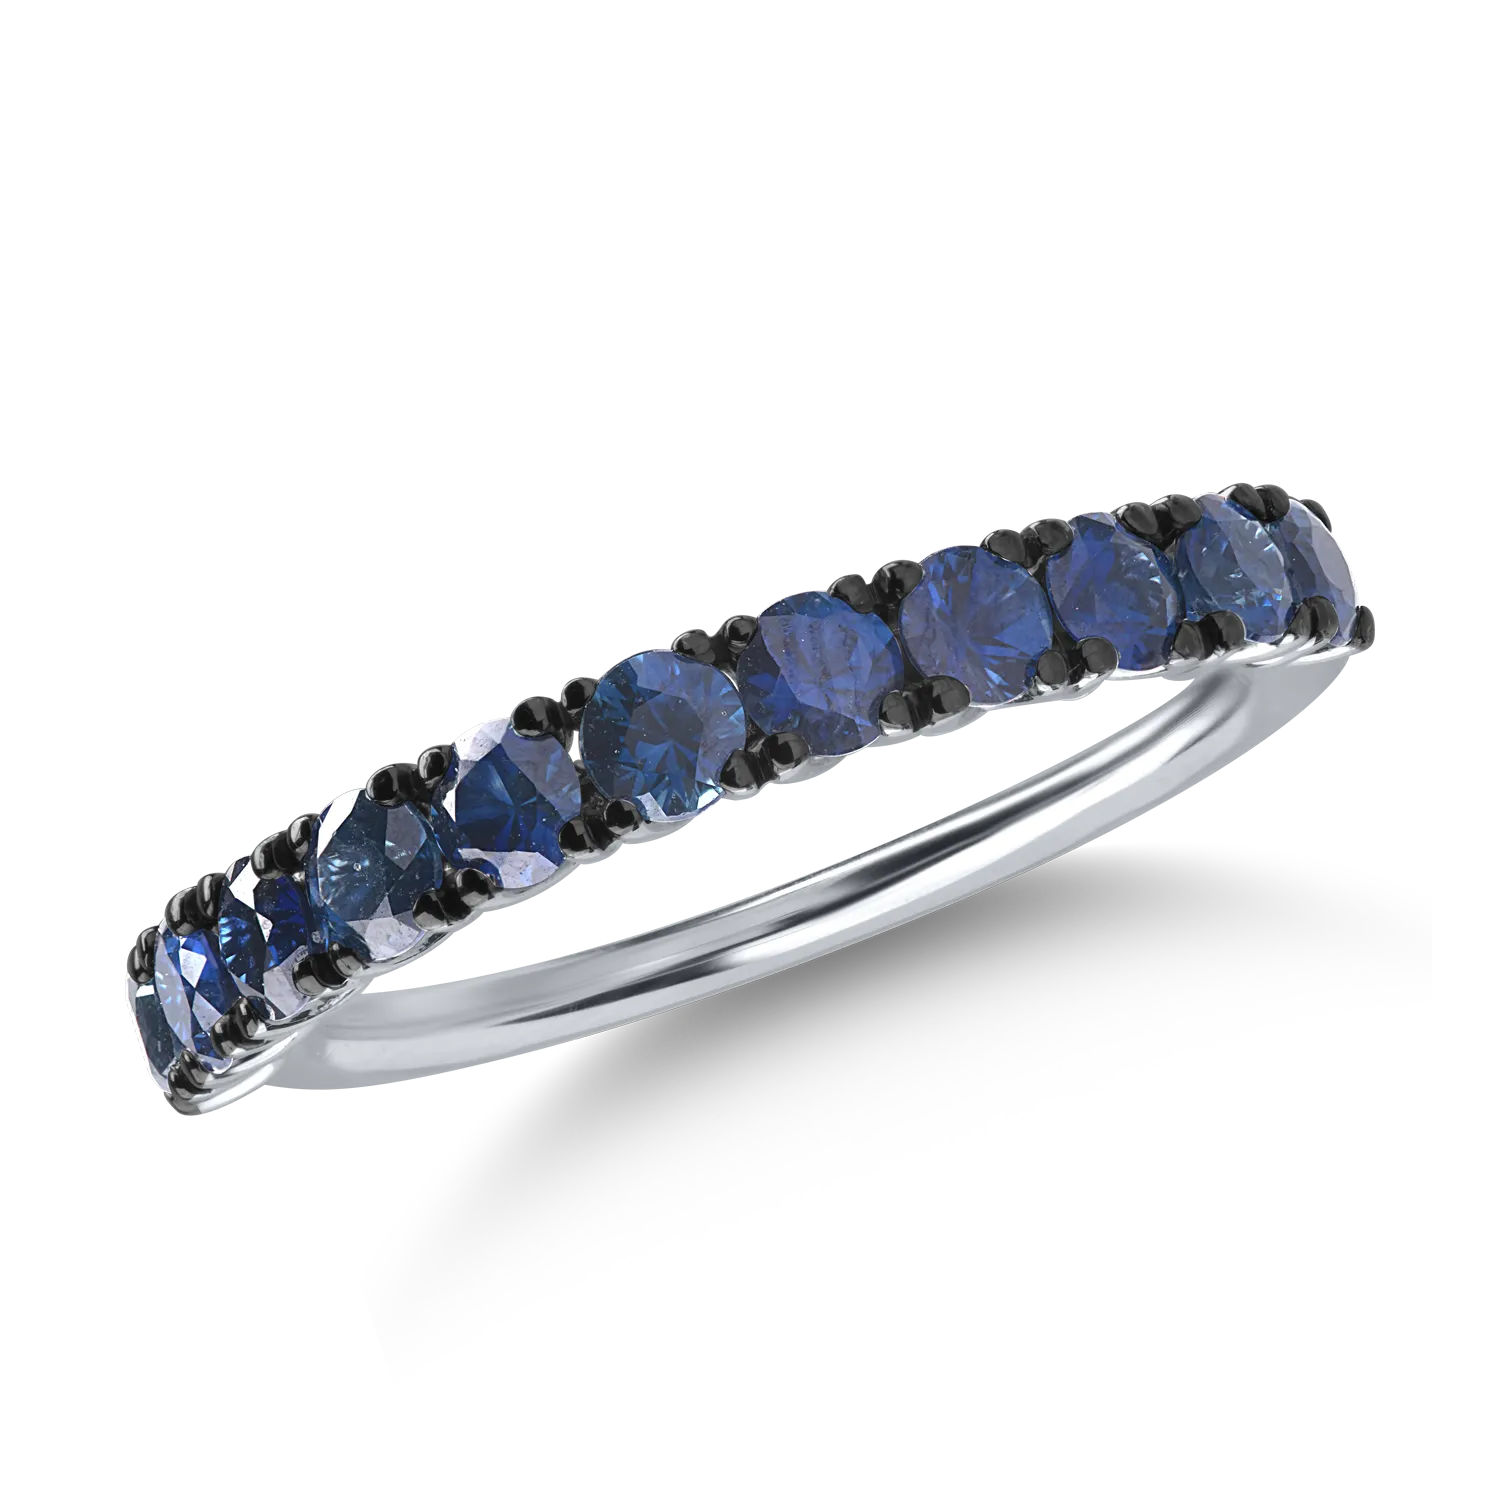 Half eternity ring in white gold with 1.13ct sapphires